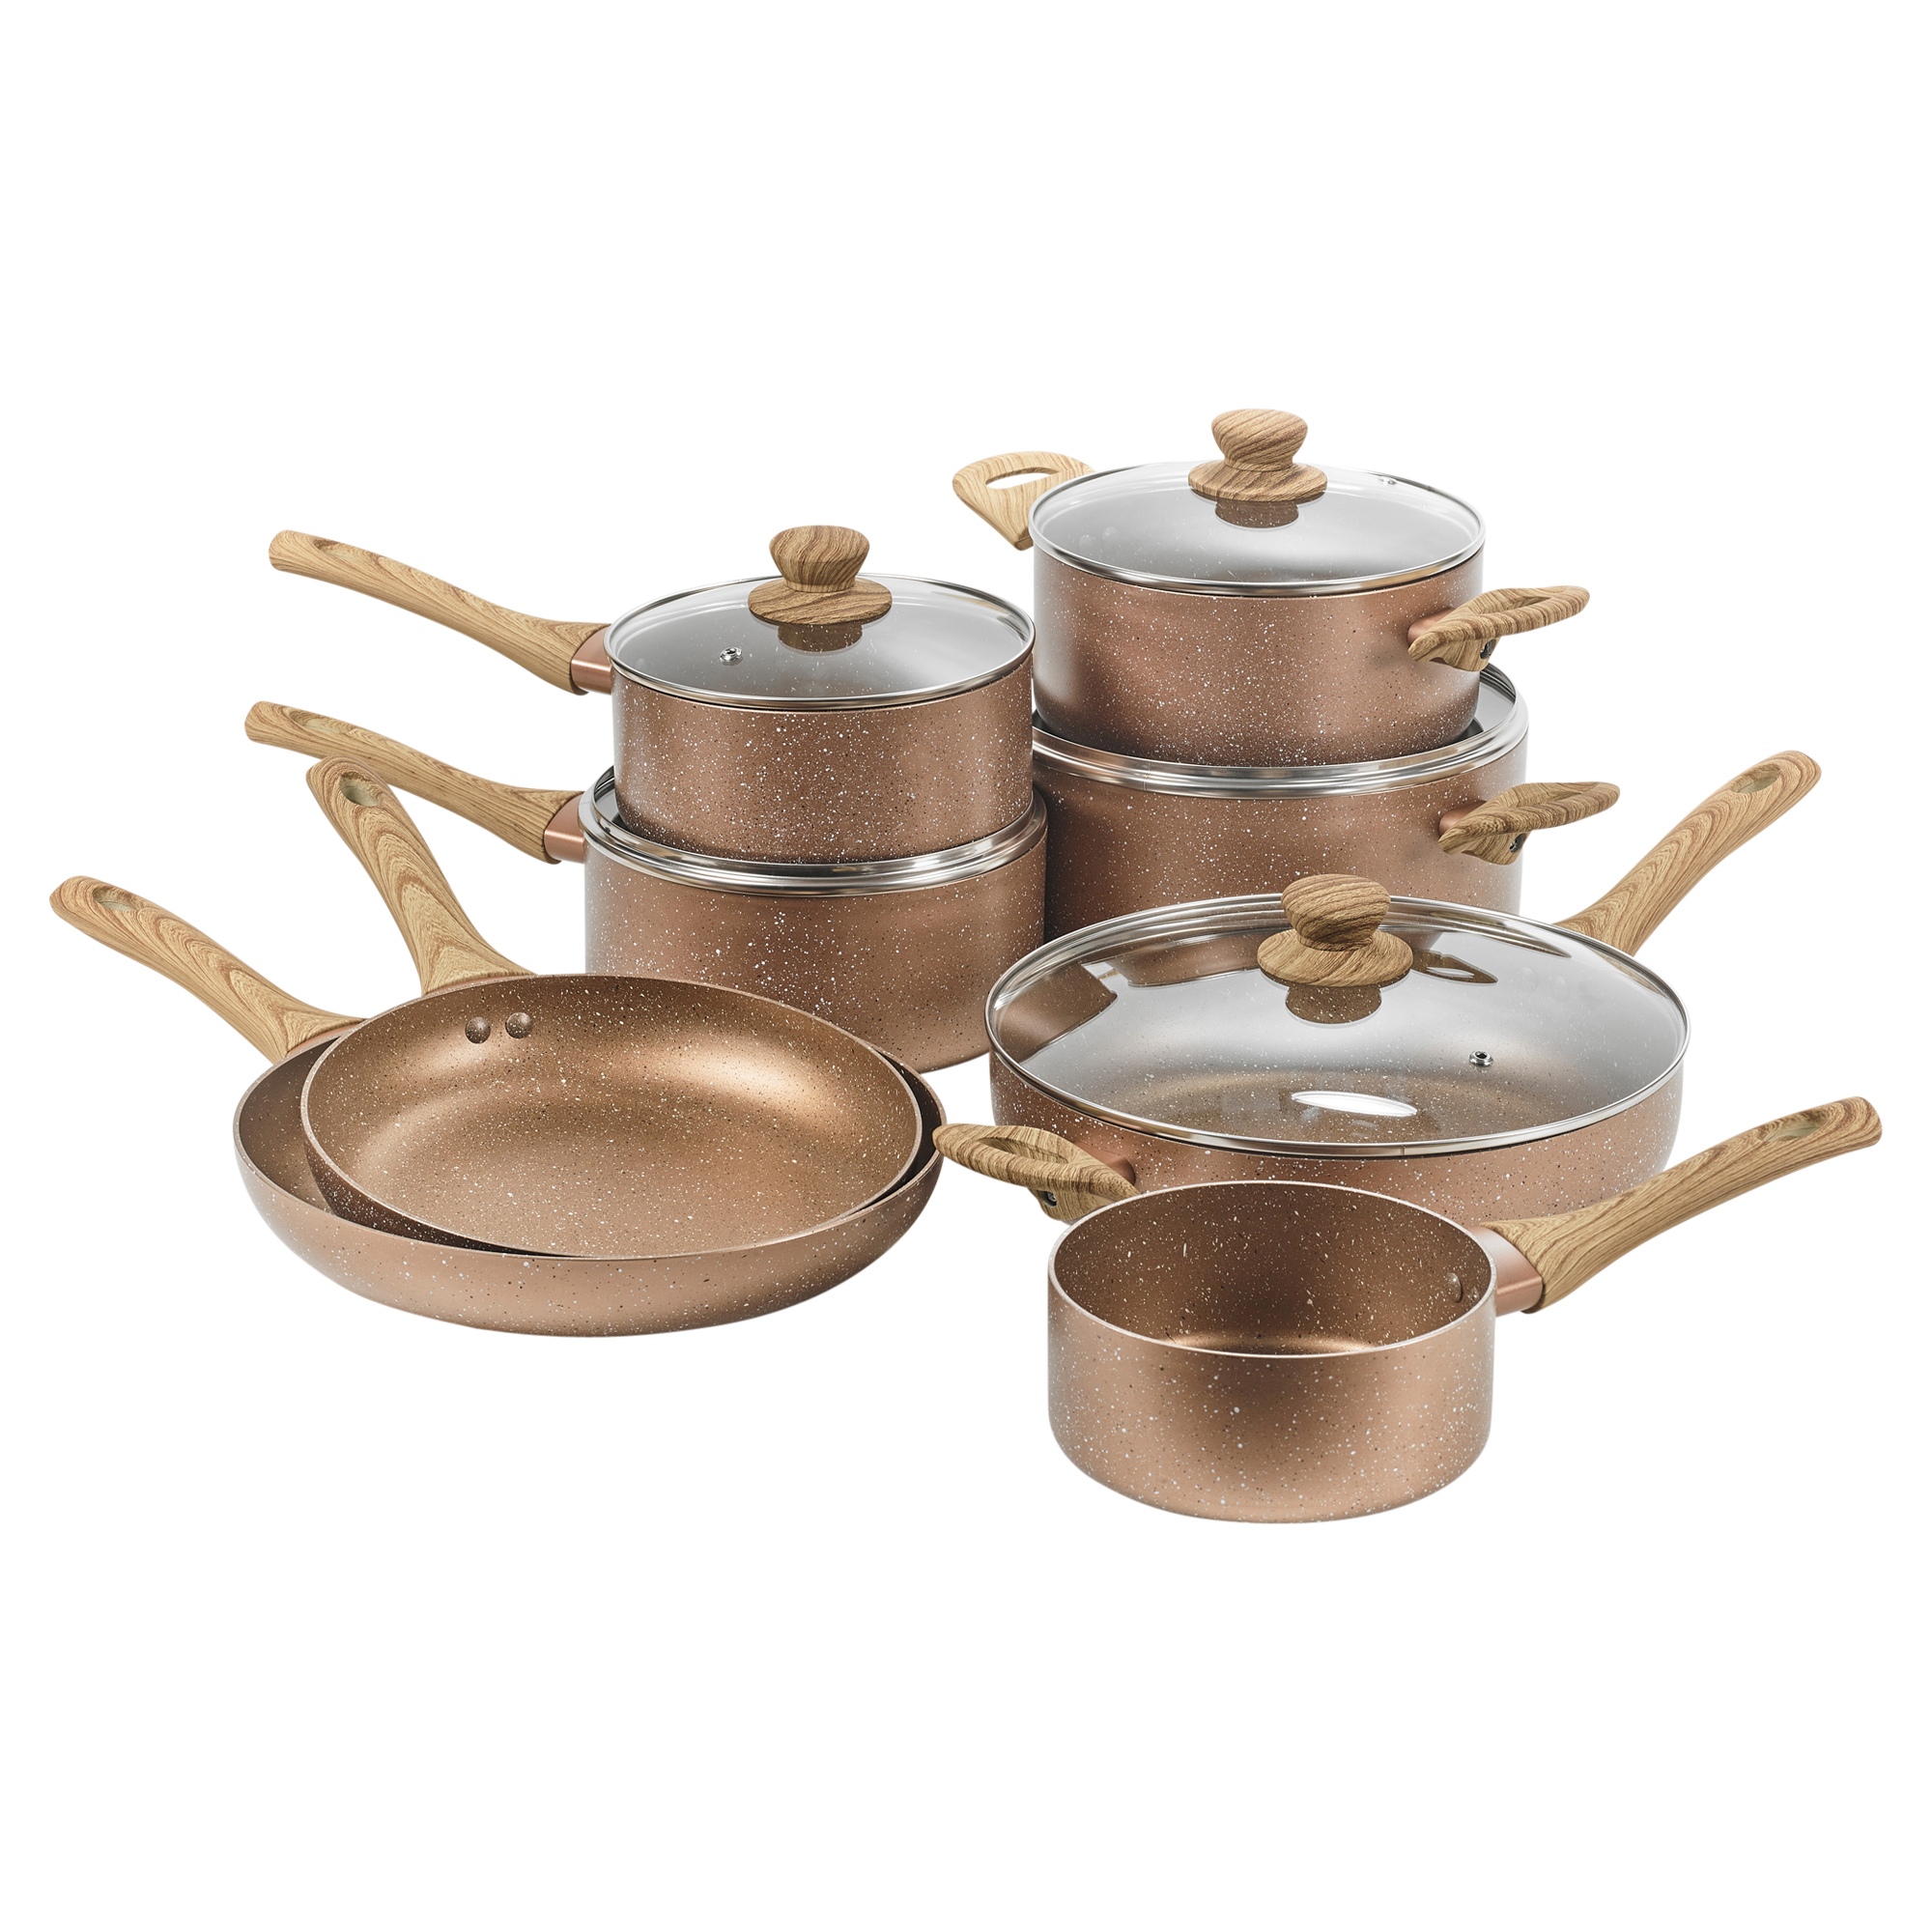 7 PCS URBN-CHEF Ceramic Rose Gold Induction Cooking Pots Frying Pan  Cookware Set